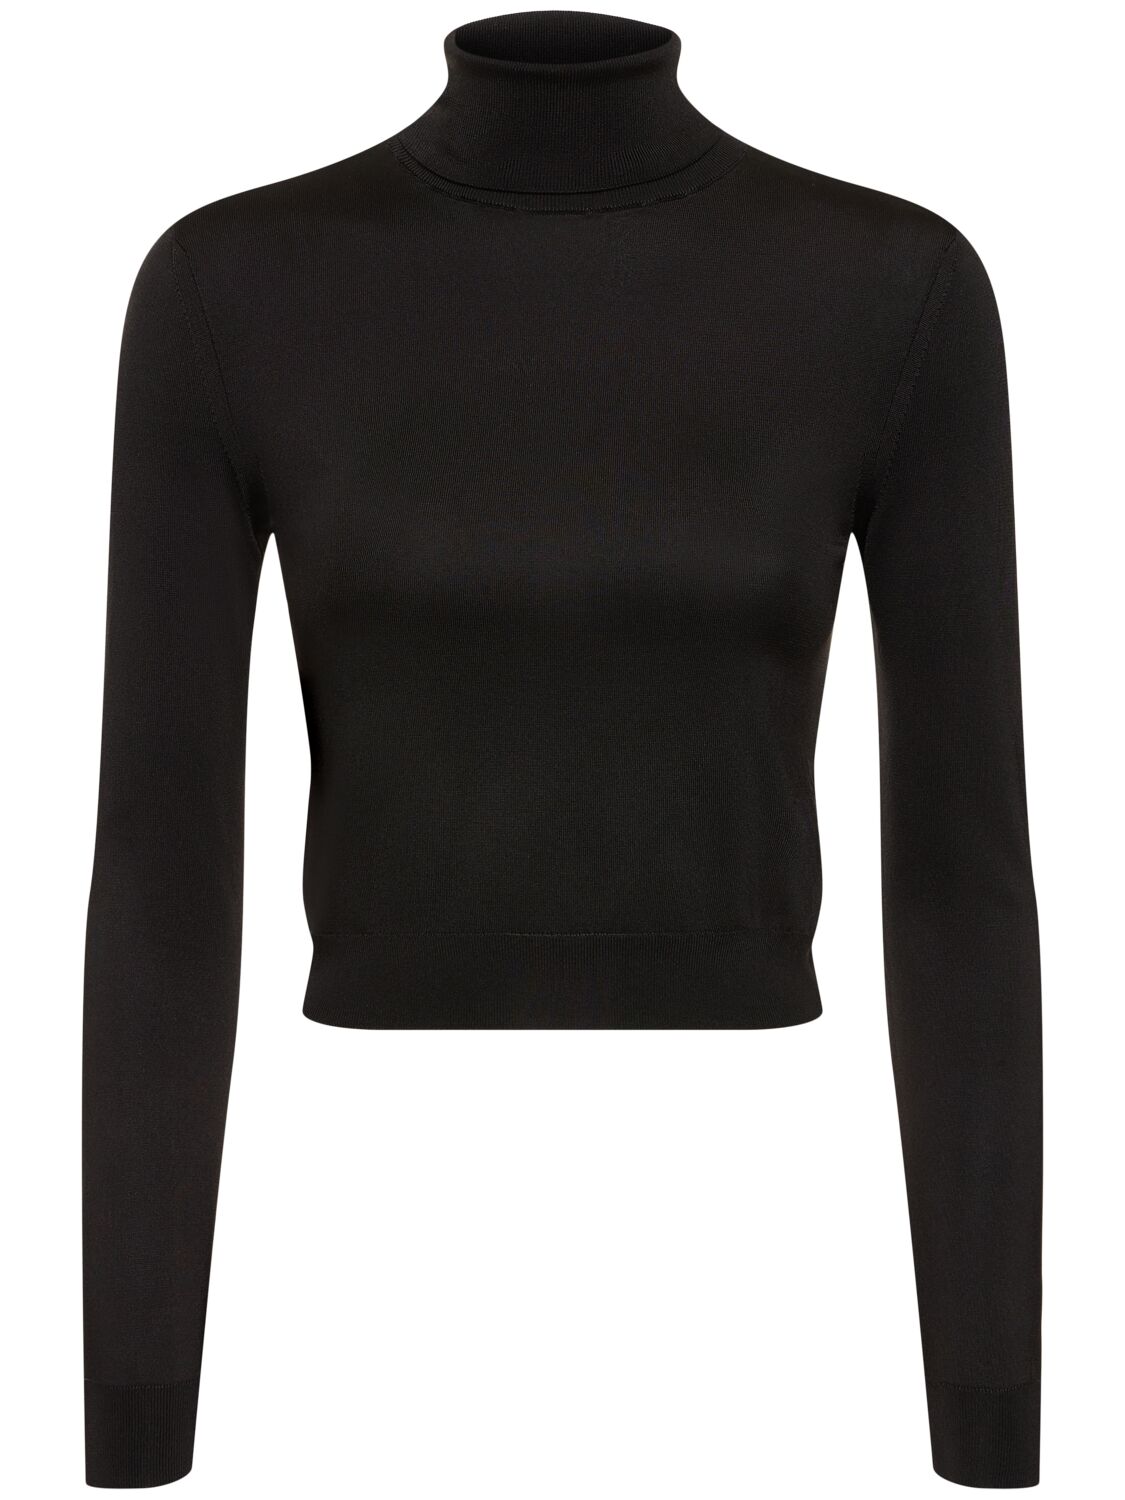 Image of Long Sleeve Cropped Silk Knit Top